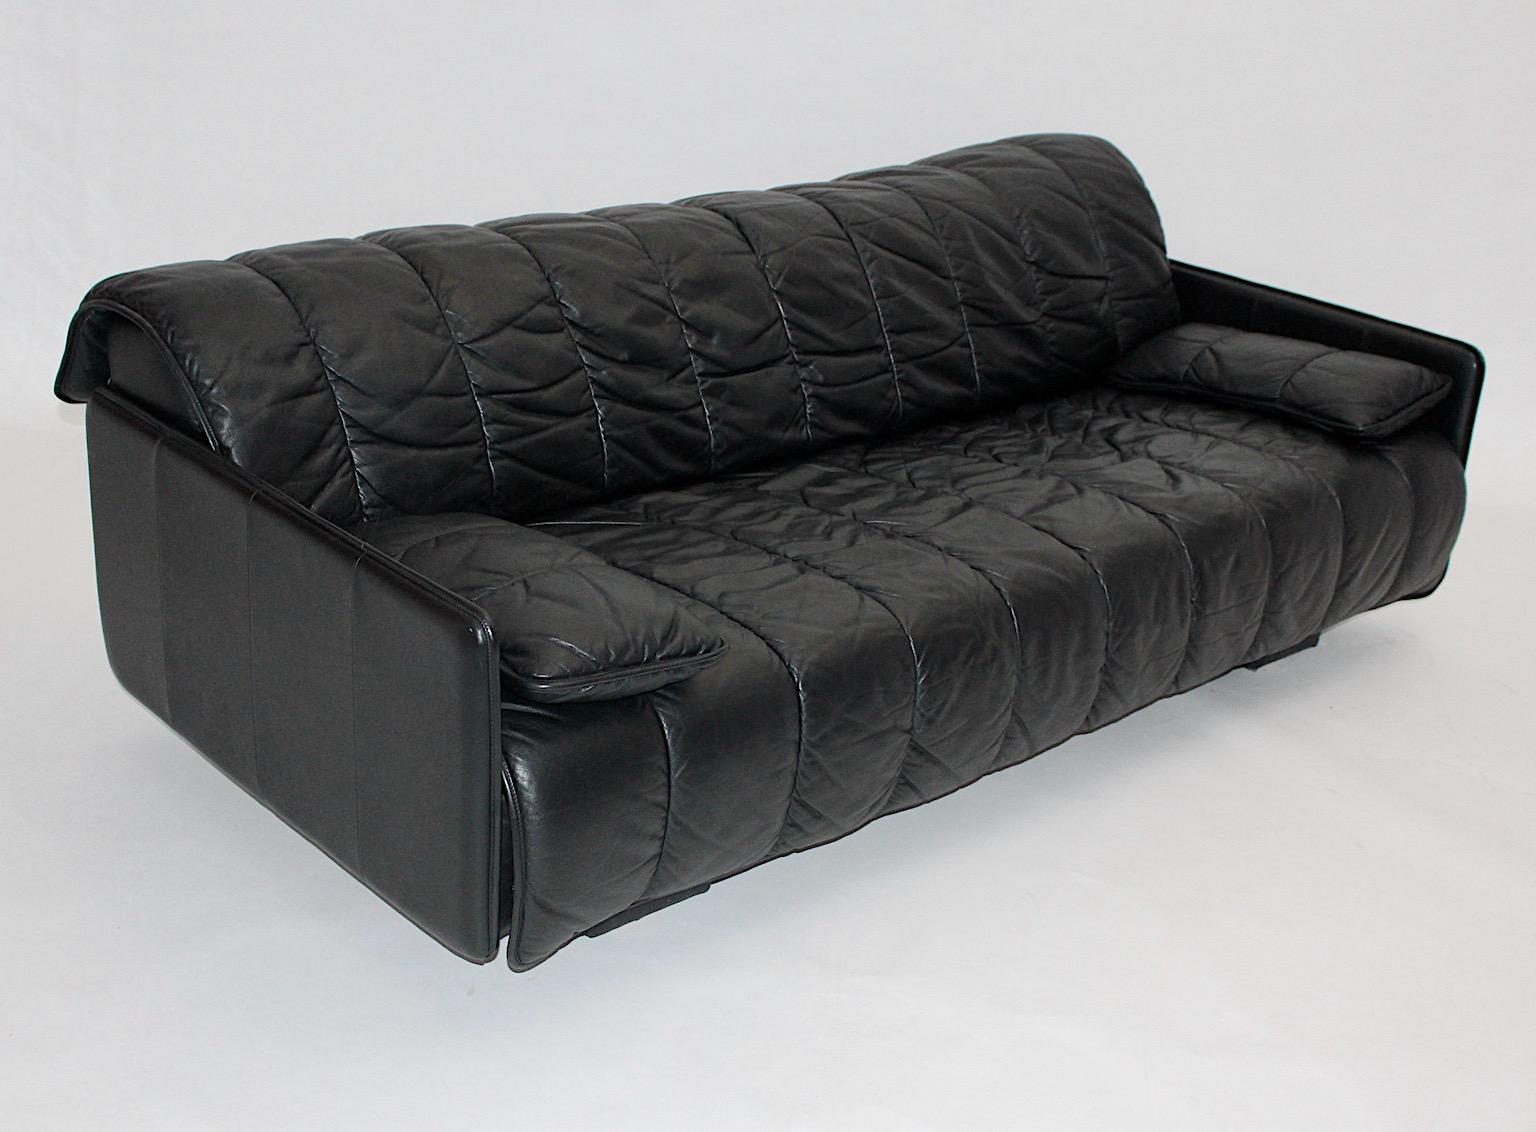 DeSede Black Leather Vintage Freestanding DS 69 Sofa Daybed 1970s Switzerland In Good Condition For Sale In Vienna, AT